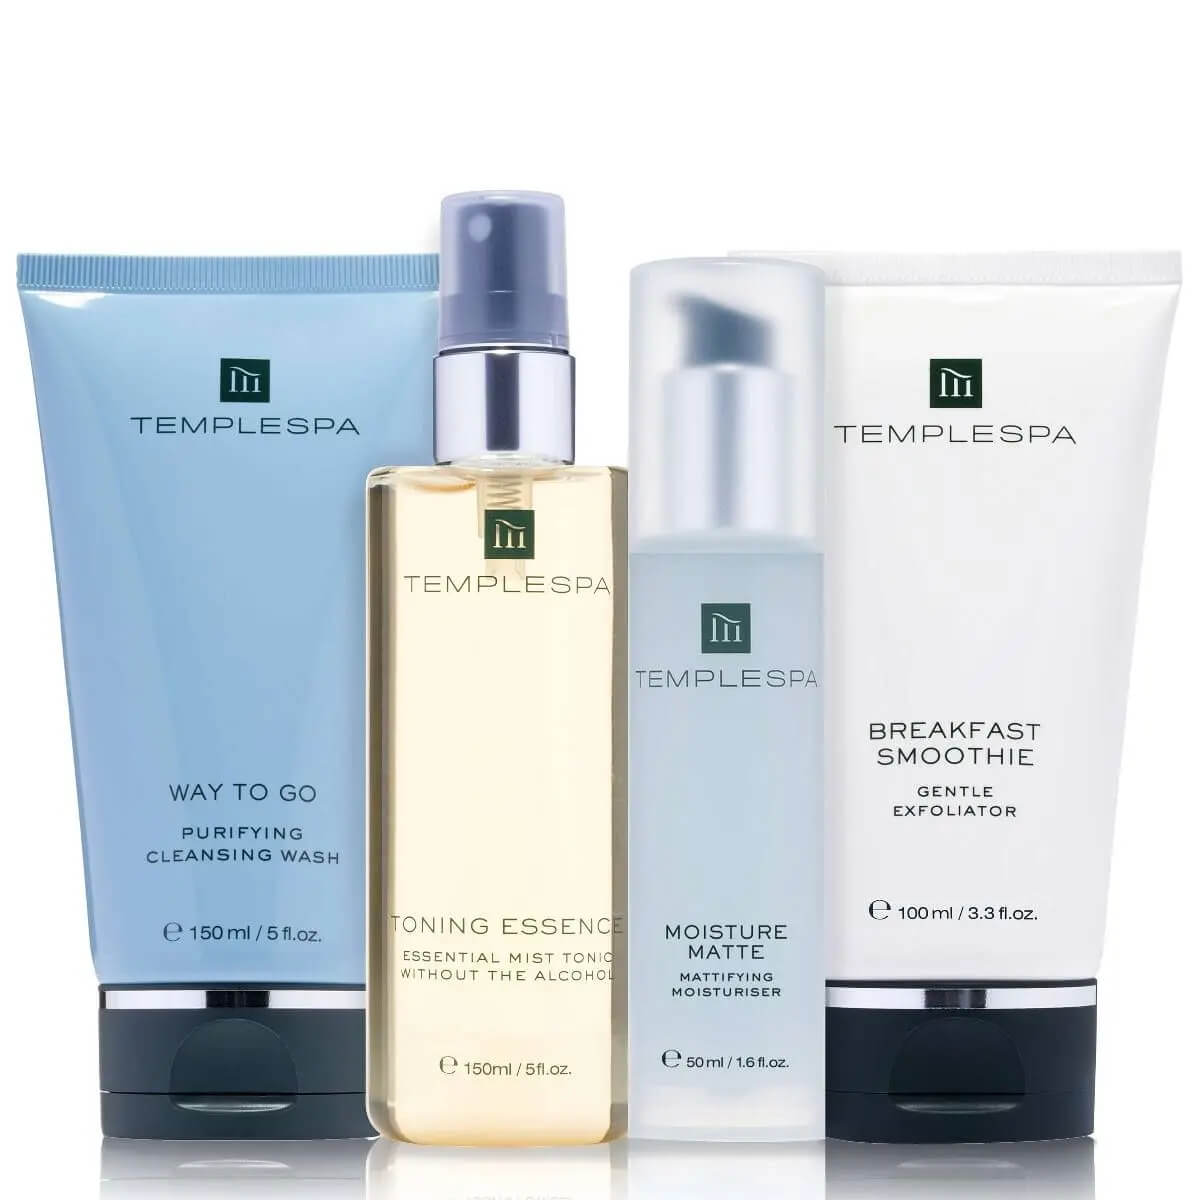 Your four product for a home facial skincare ritual. - YOUR DAILY FACIAL